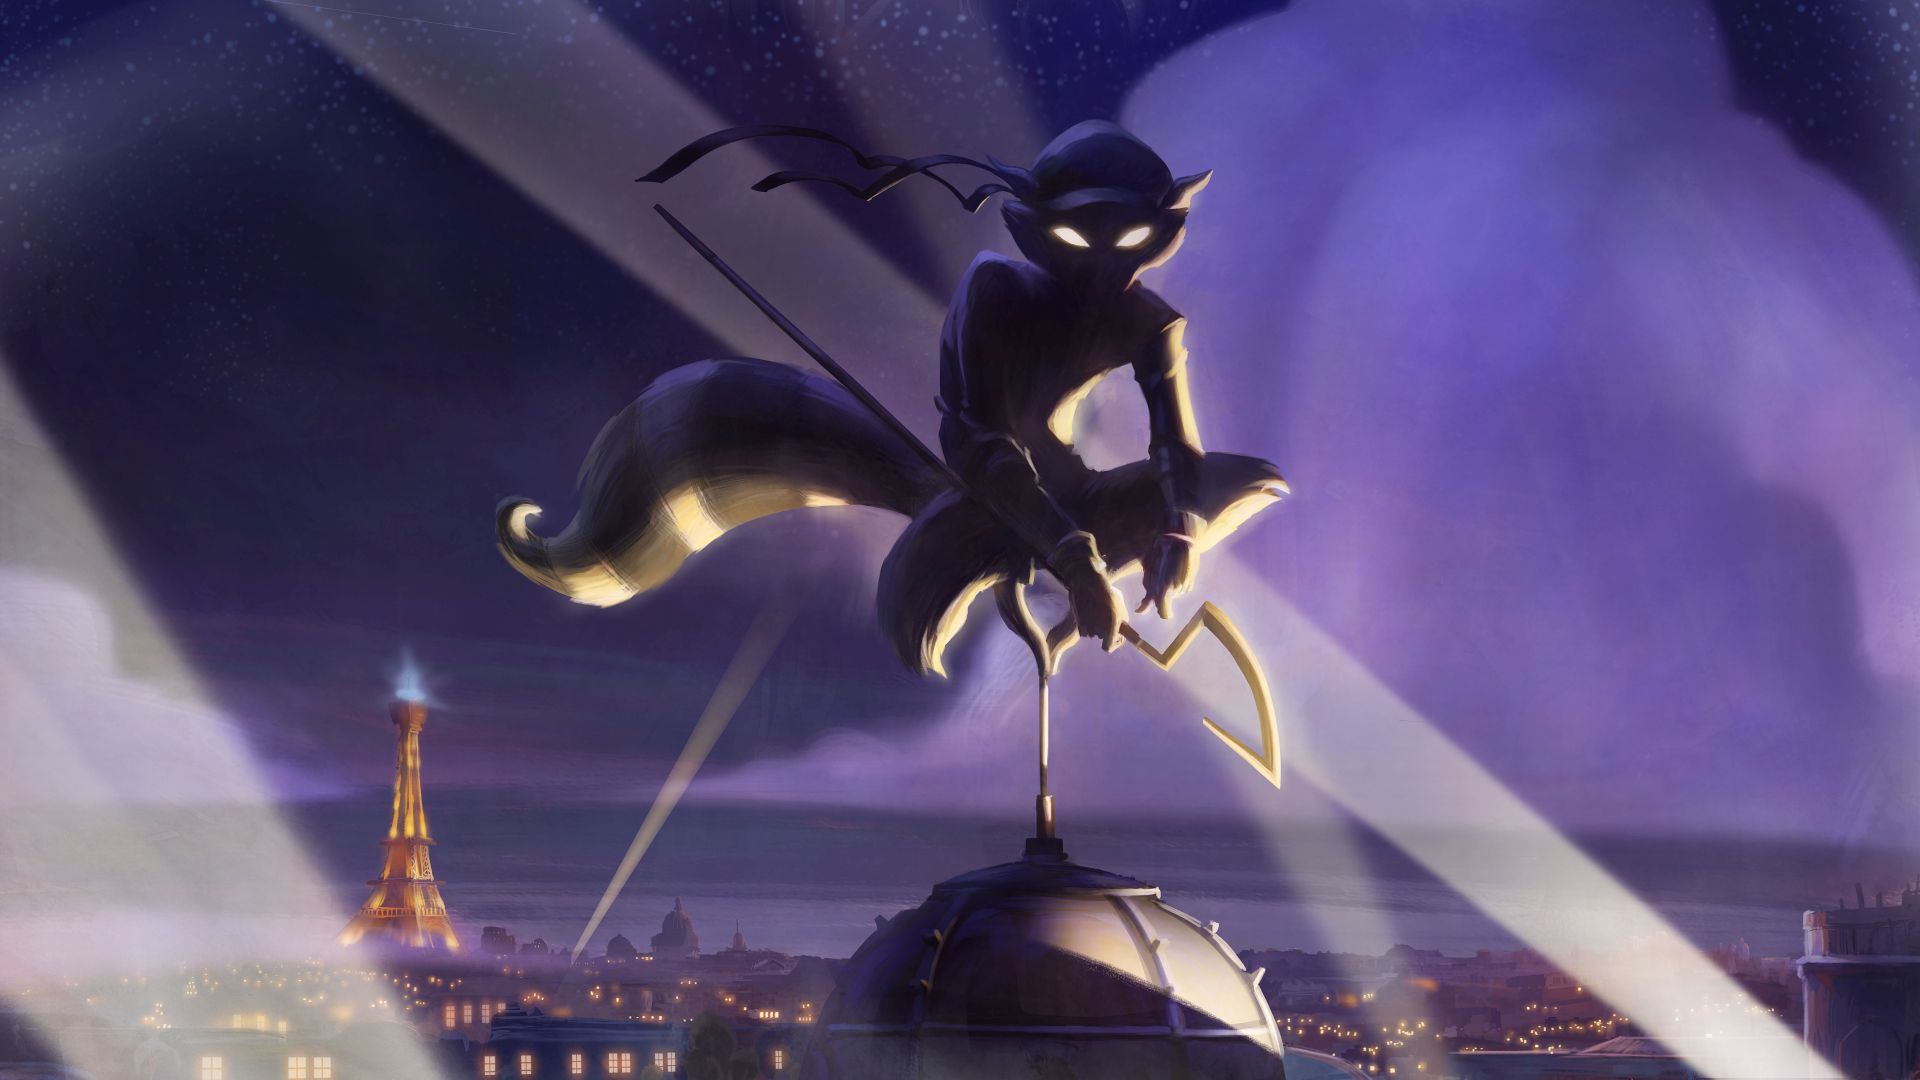 Let's Talk About Sly Cooper 5 on the PS5 – Chipmunky Radio